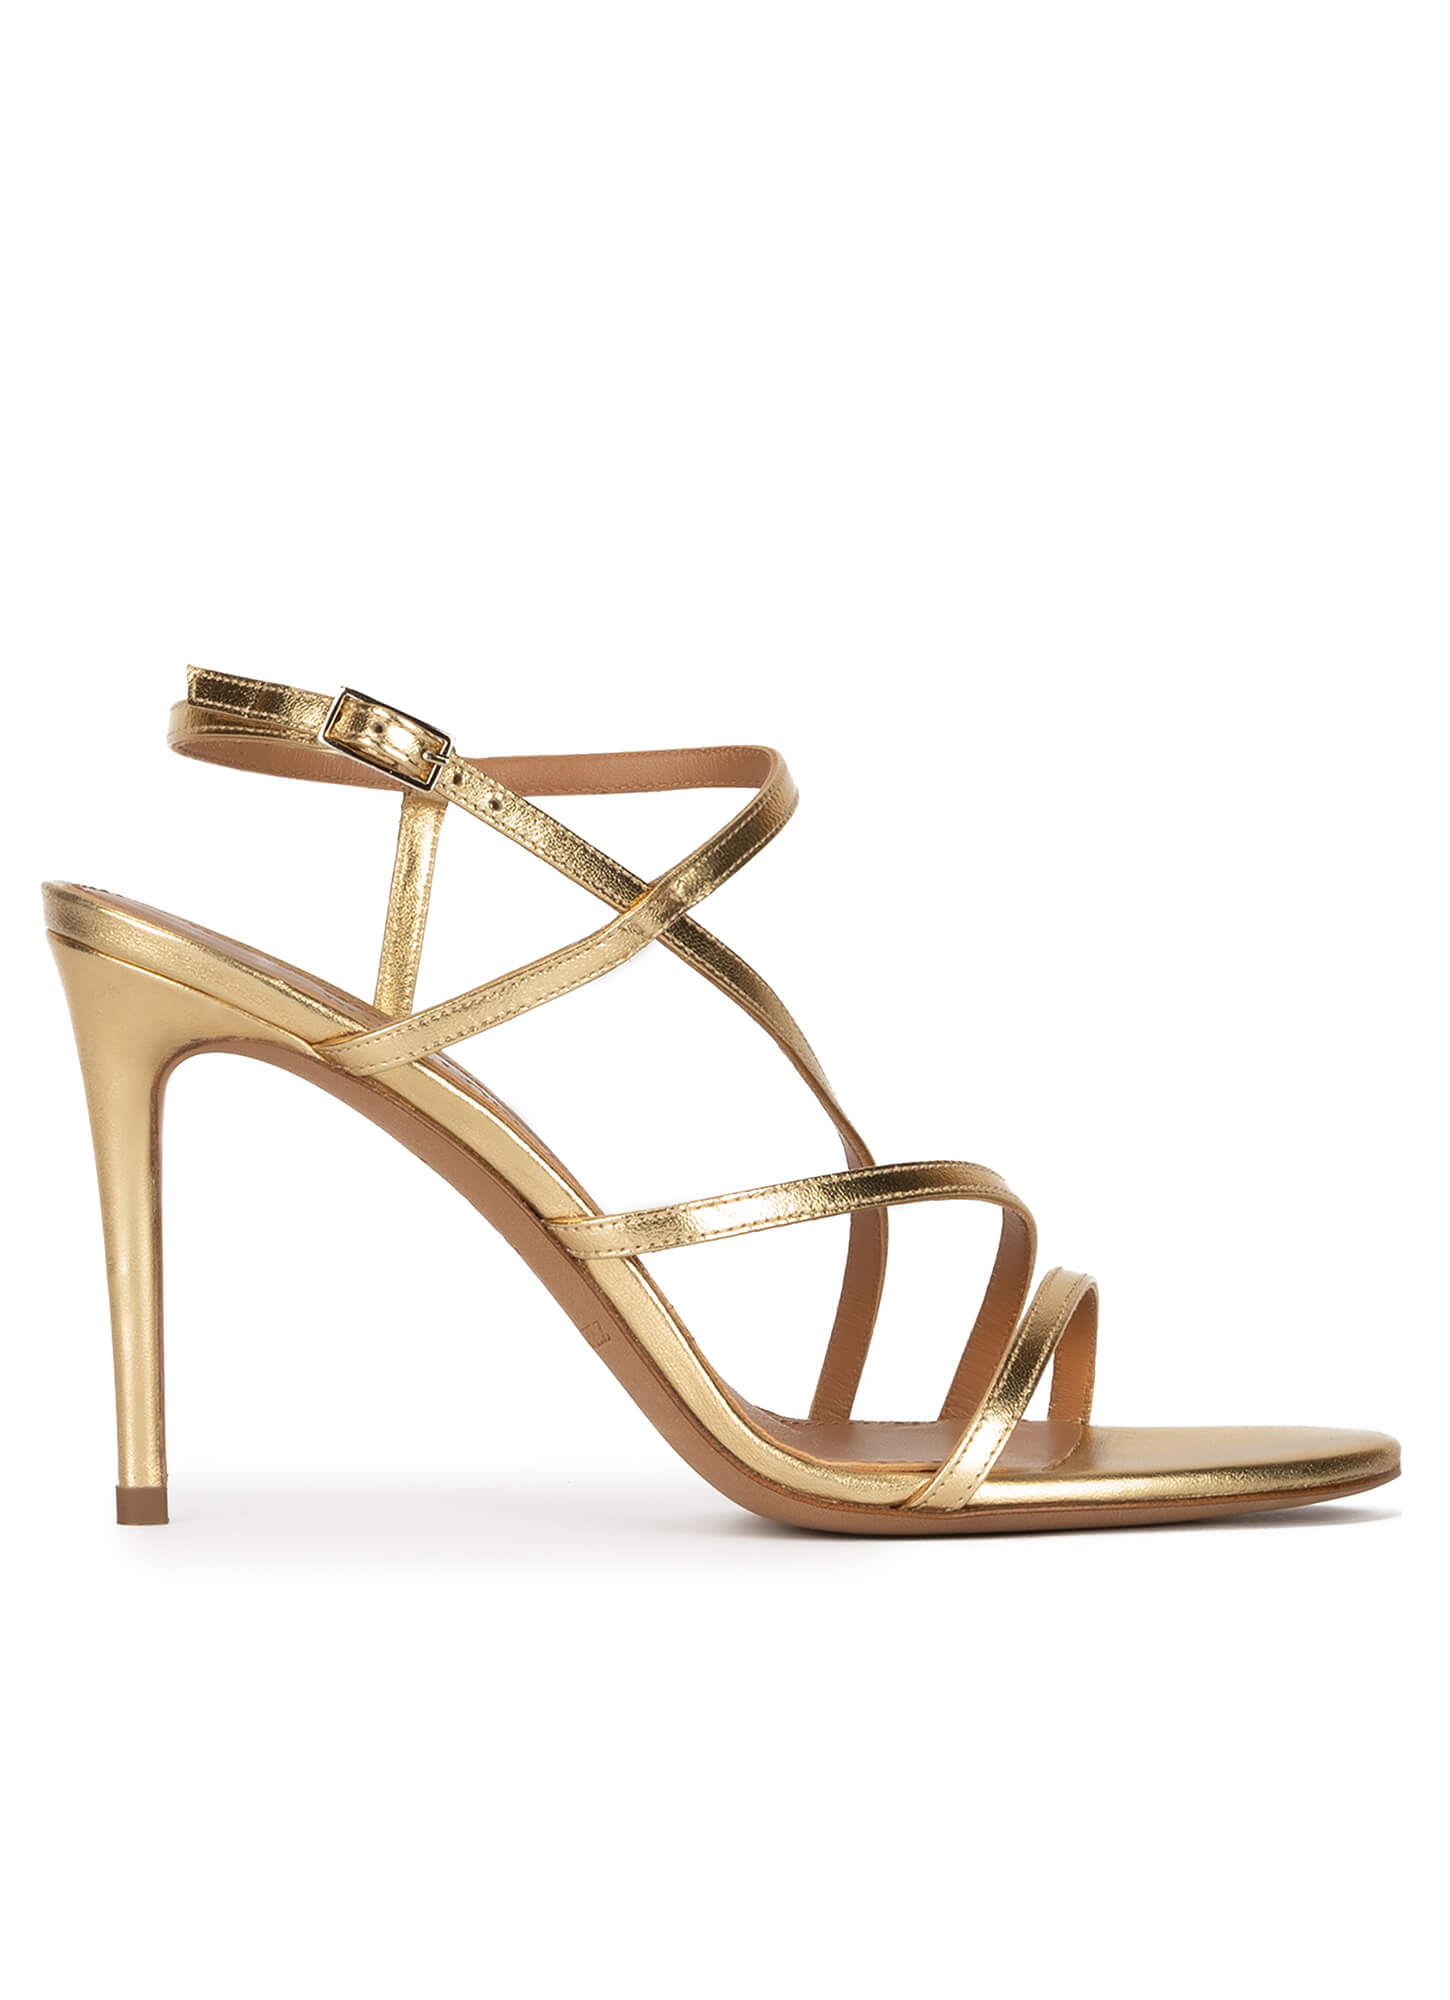 Strappy high heel sandals in gold leather . PURA LOPEZ